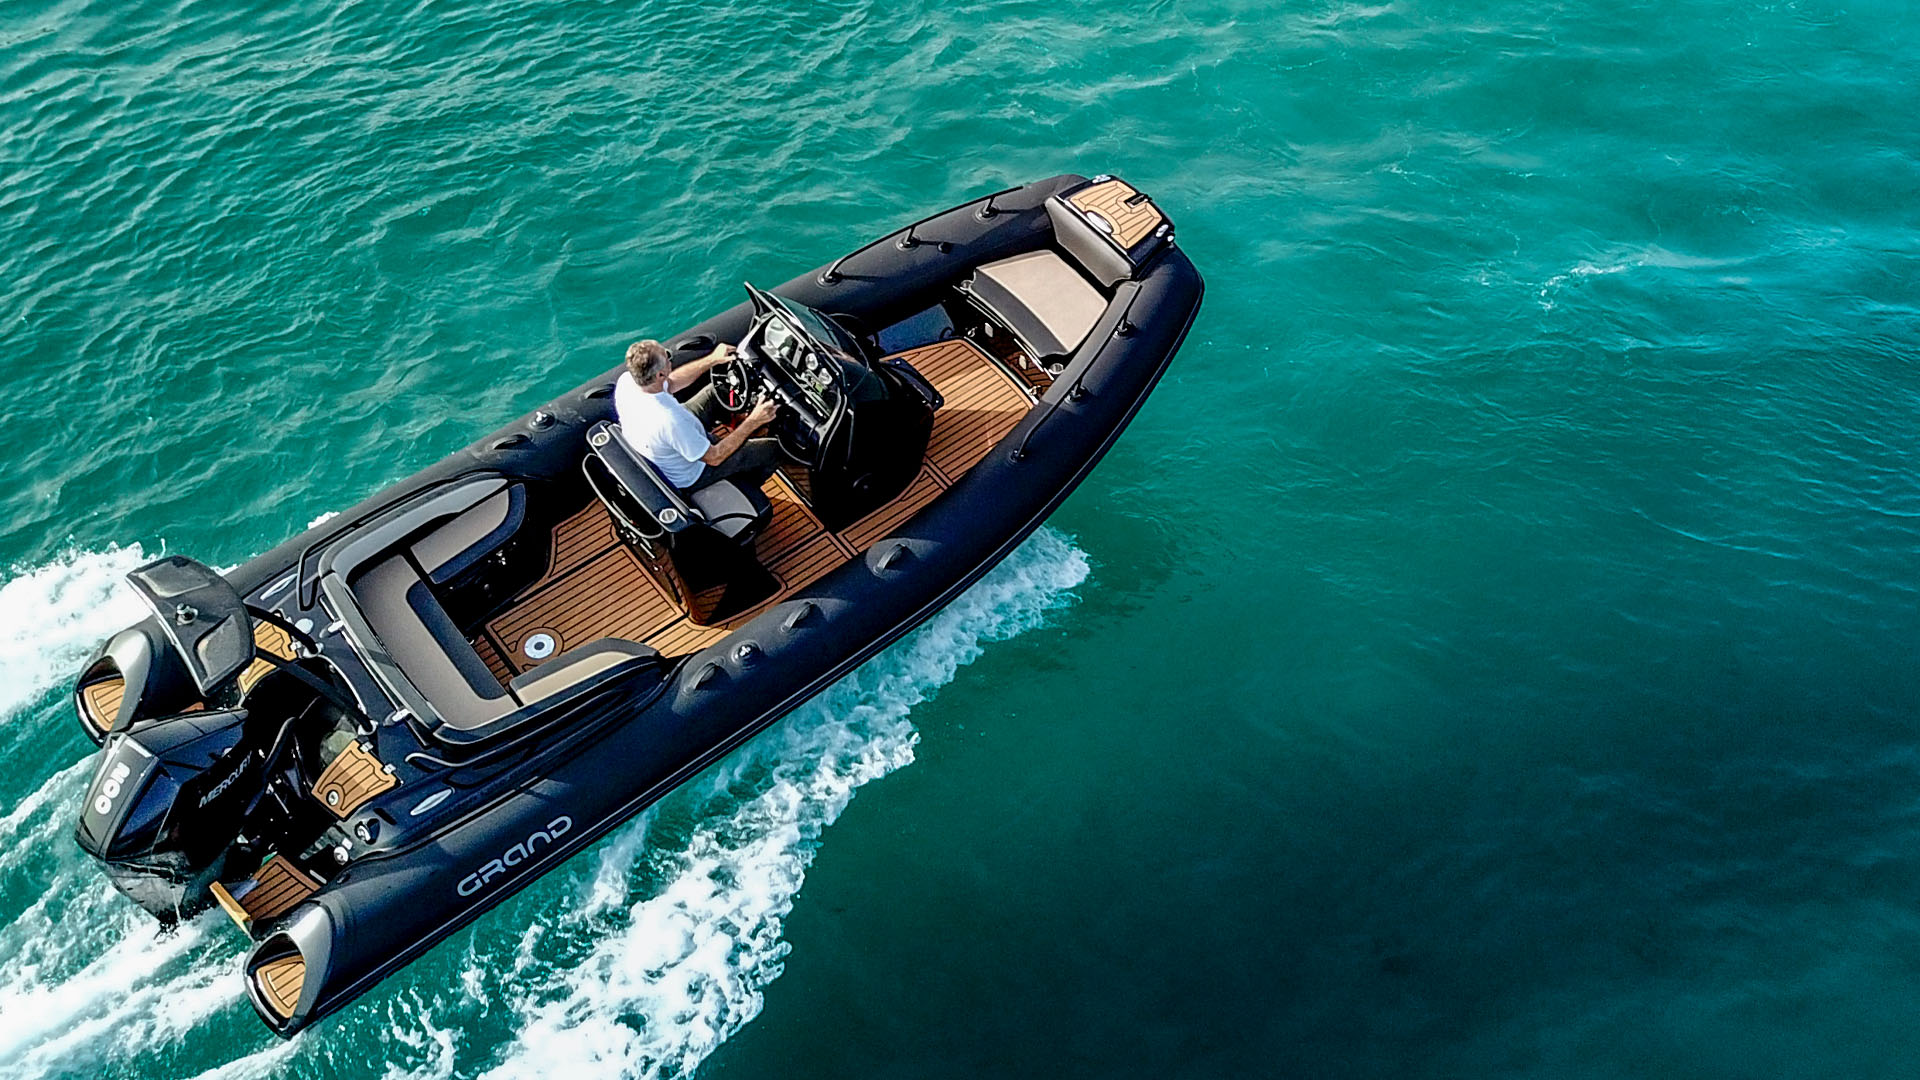 A Grand G650 RIB in black with tan sea deck flooring cruising on turquoise water